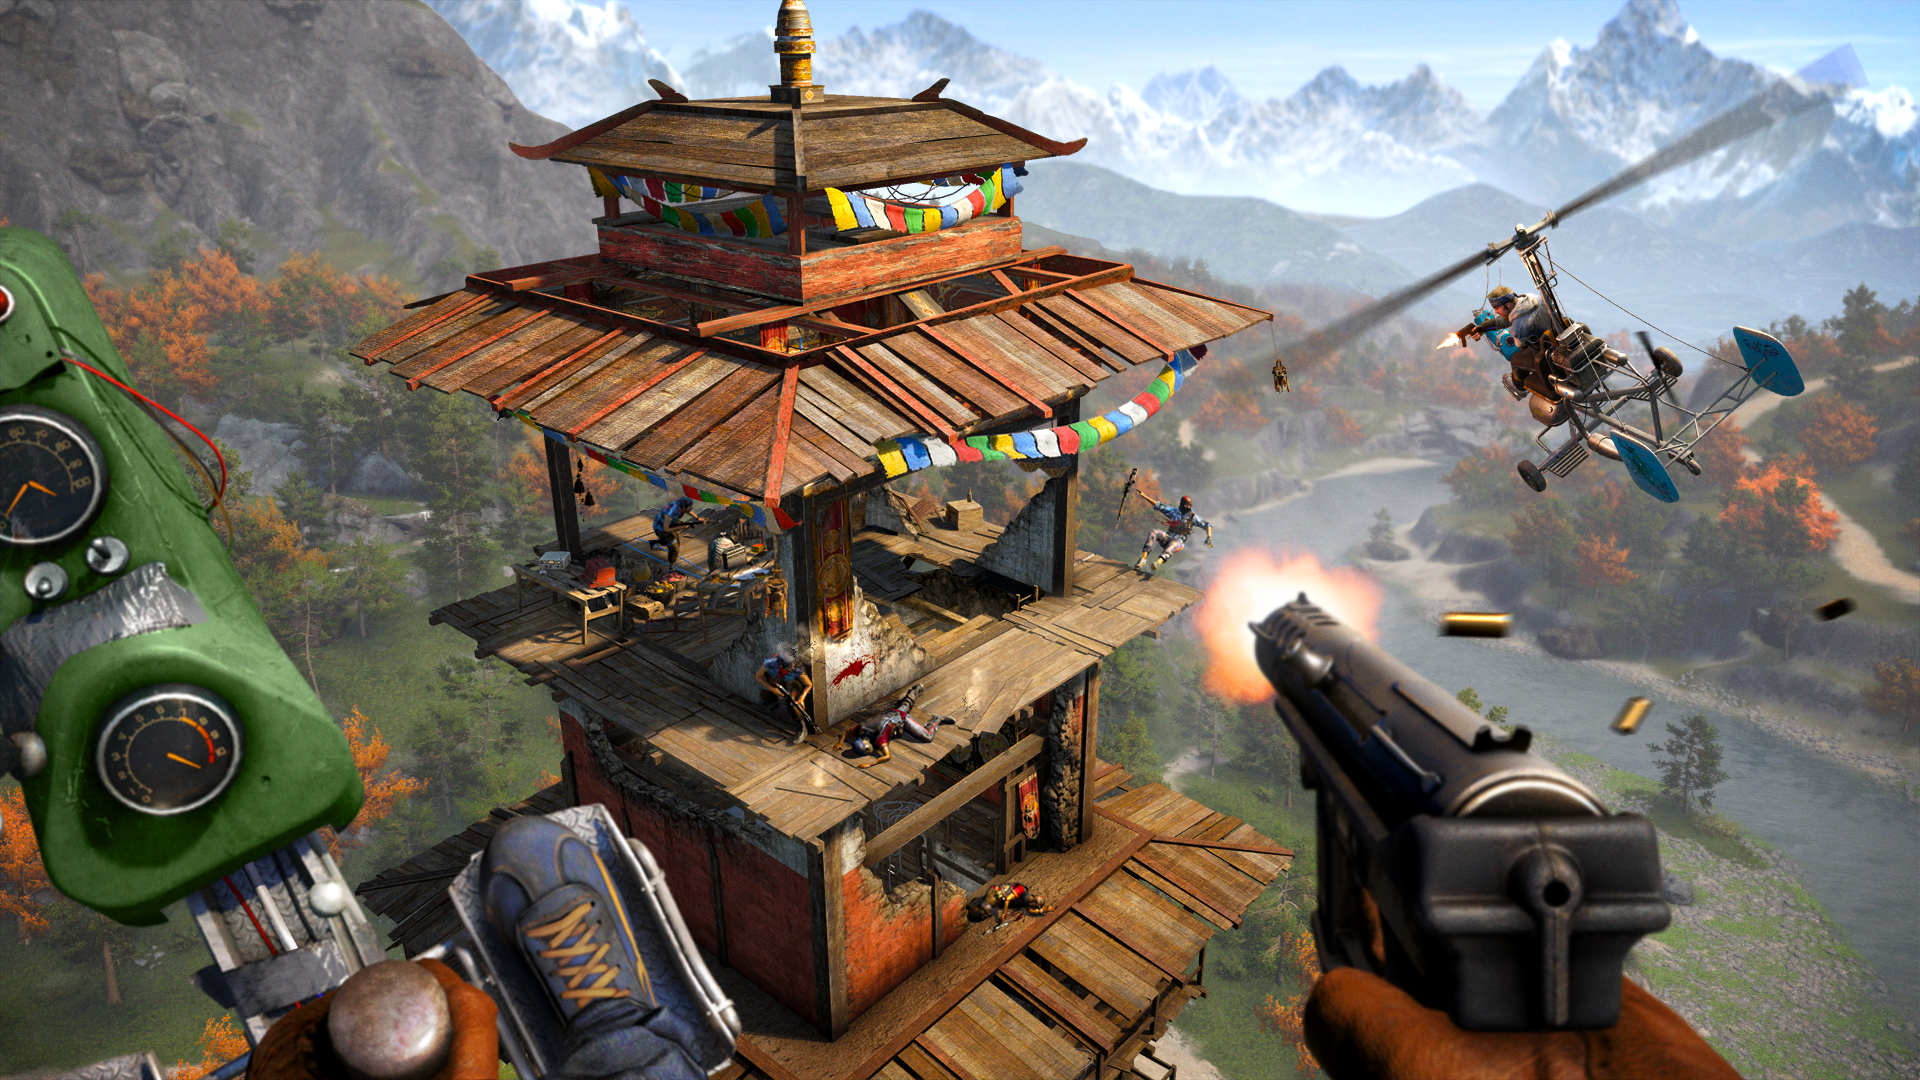 No, Far Cry 4 is not currently free on PSN